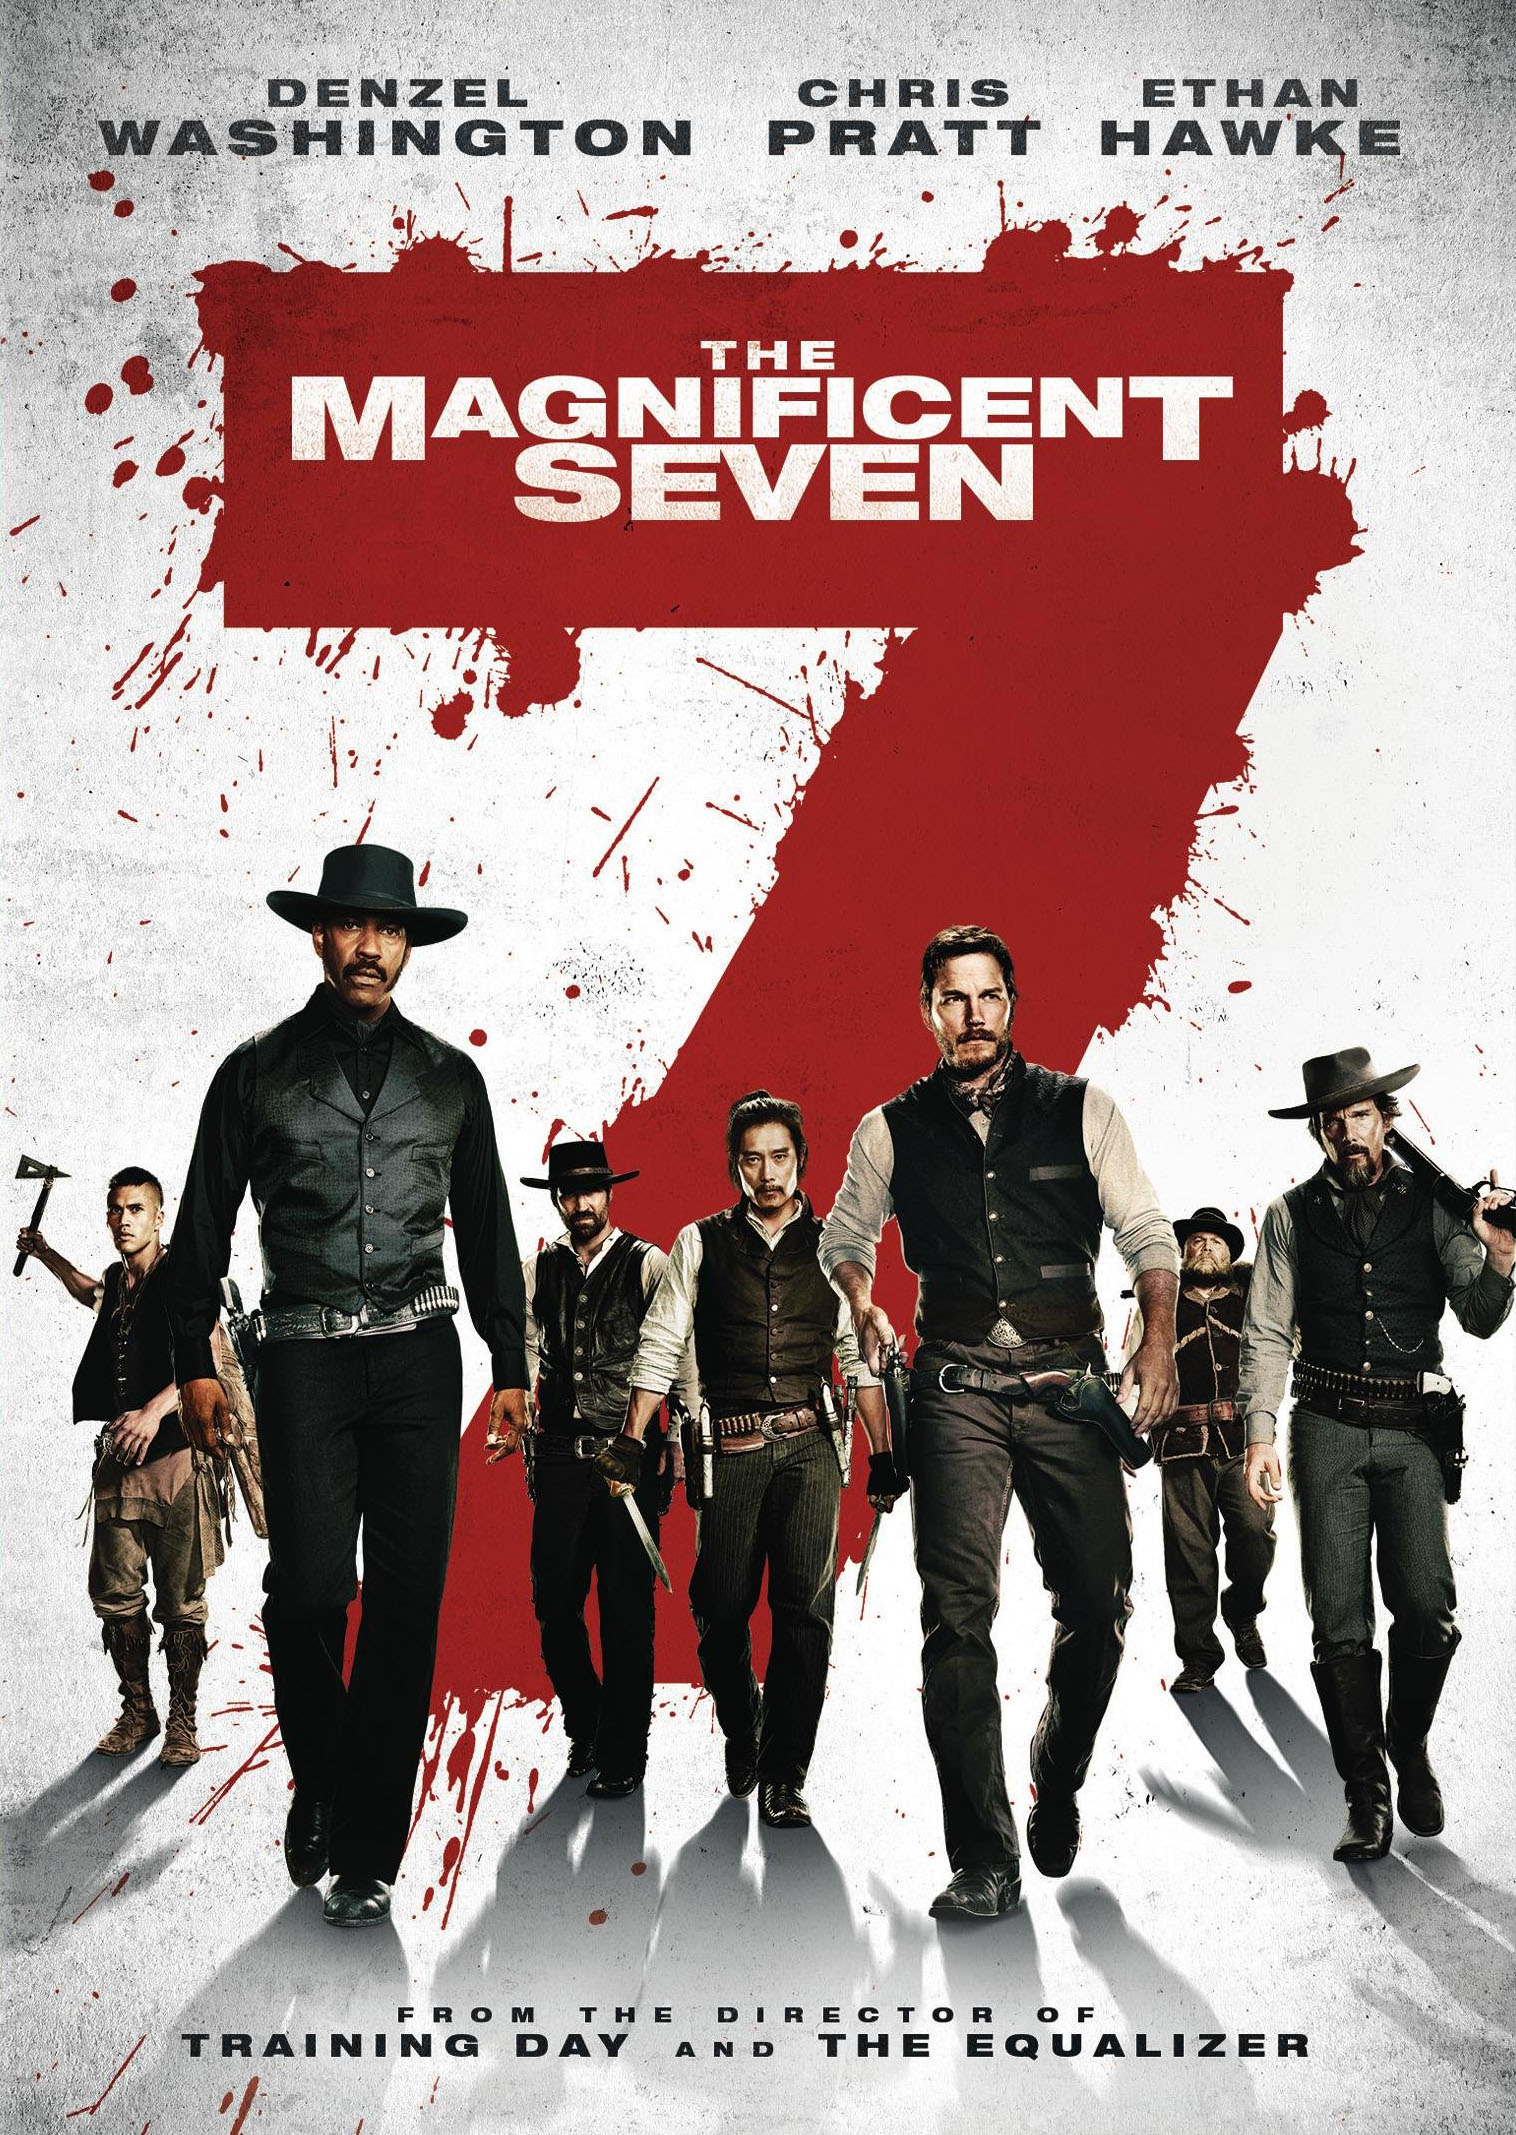 Complete Classic Movie The Magnificent Seven (2016) Independent Film